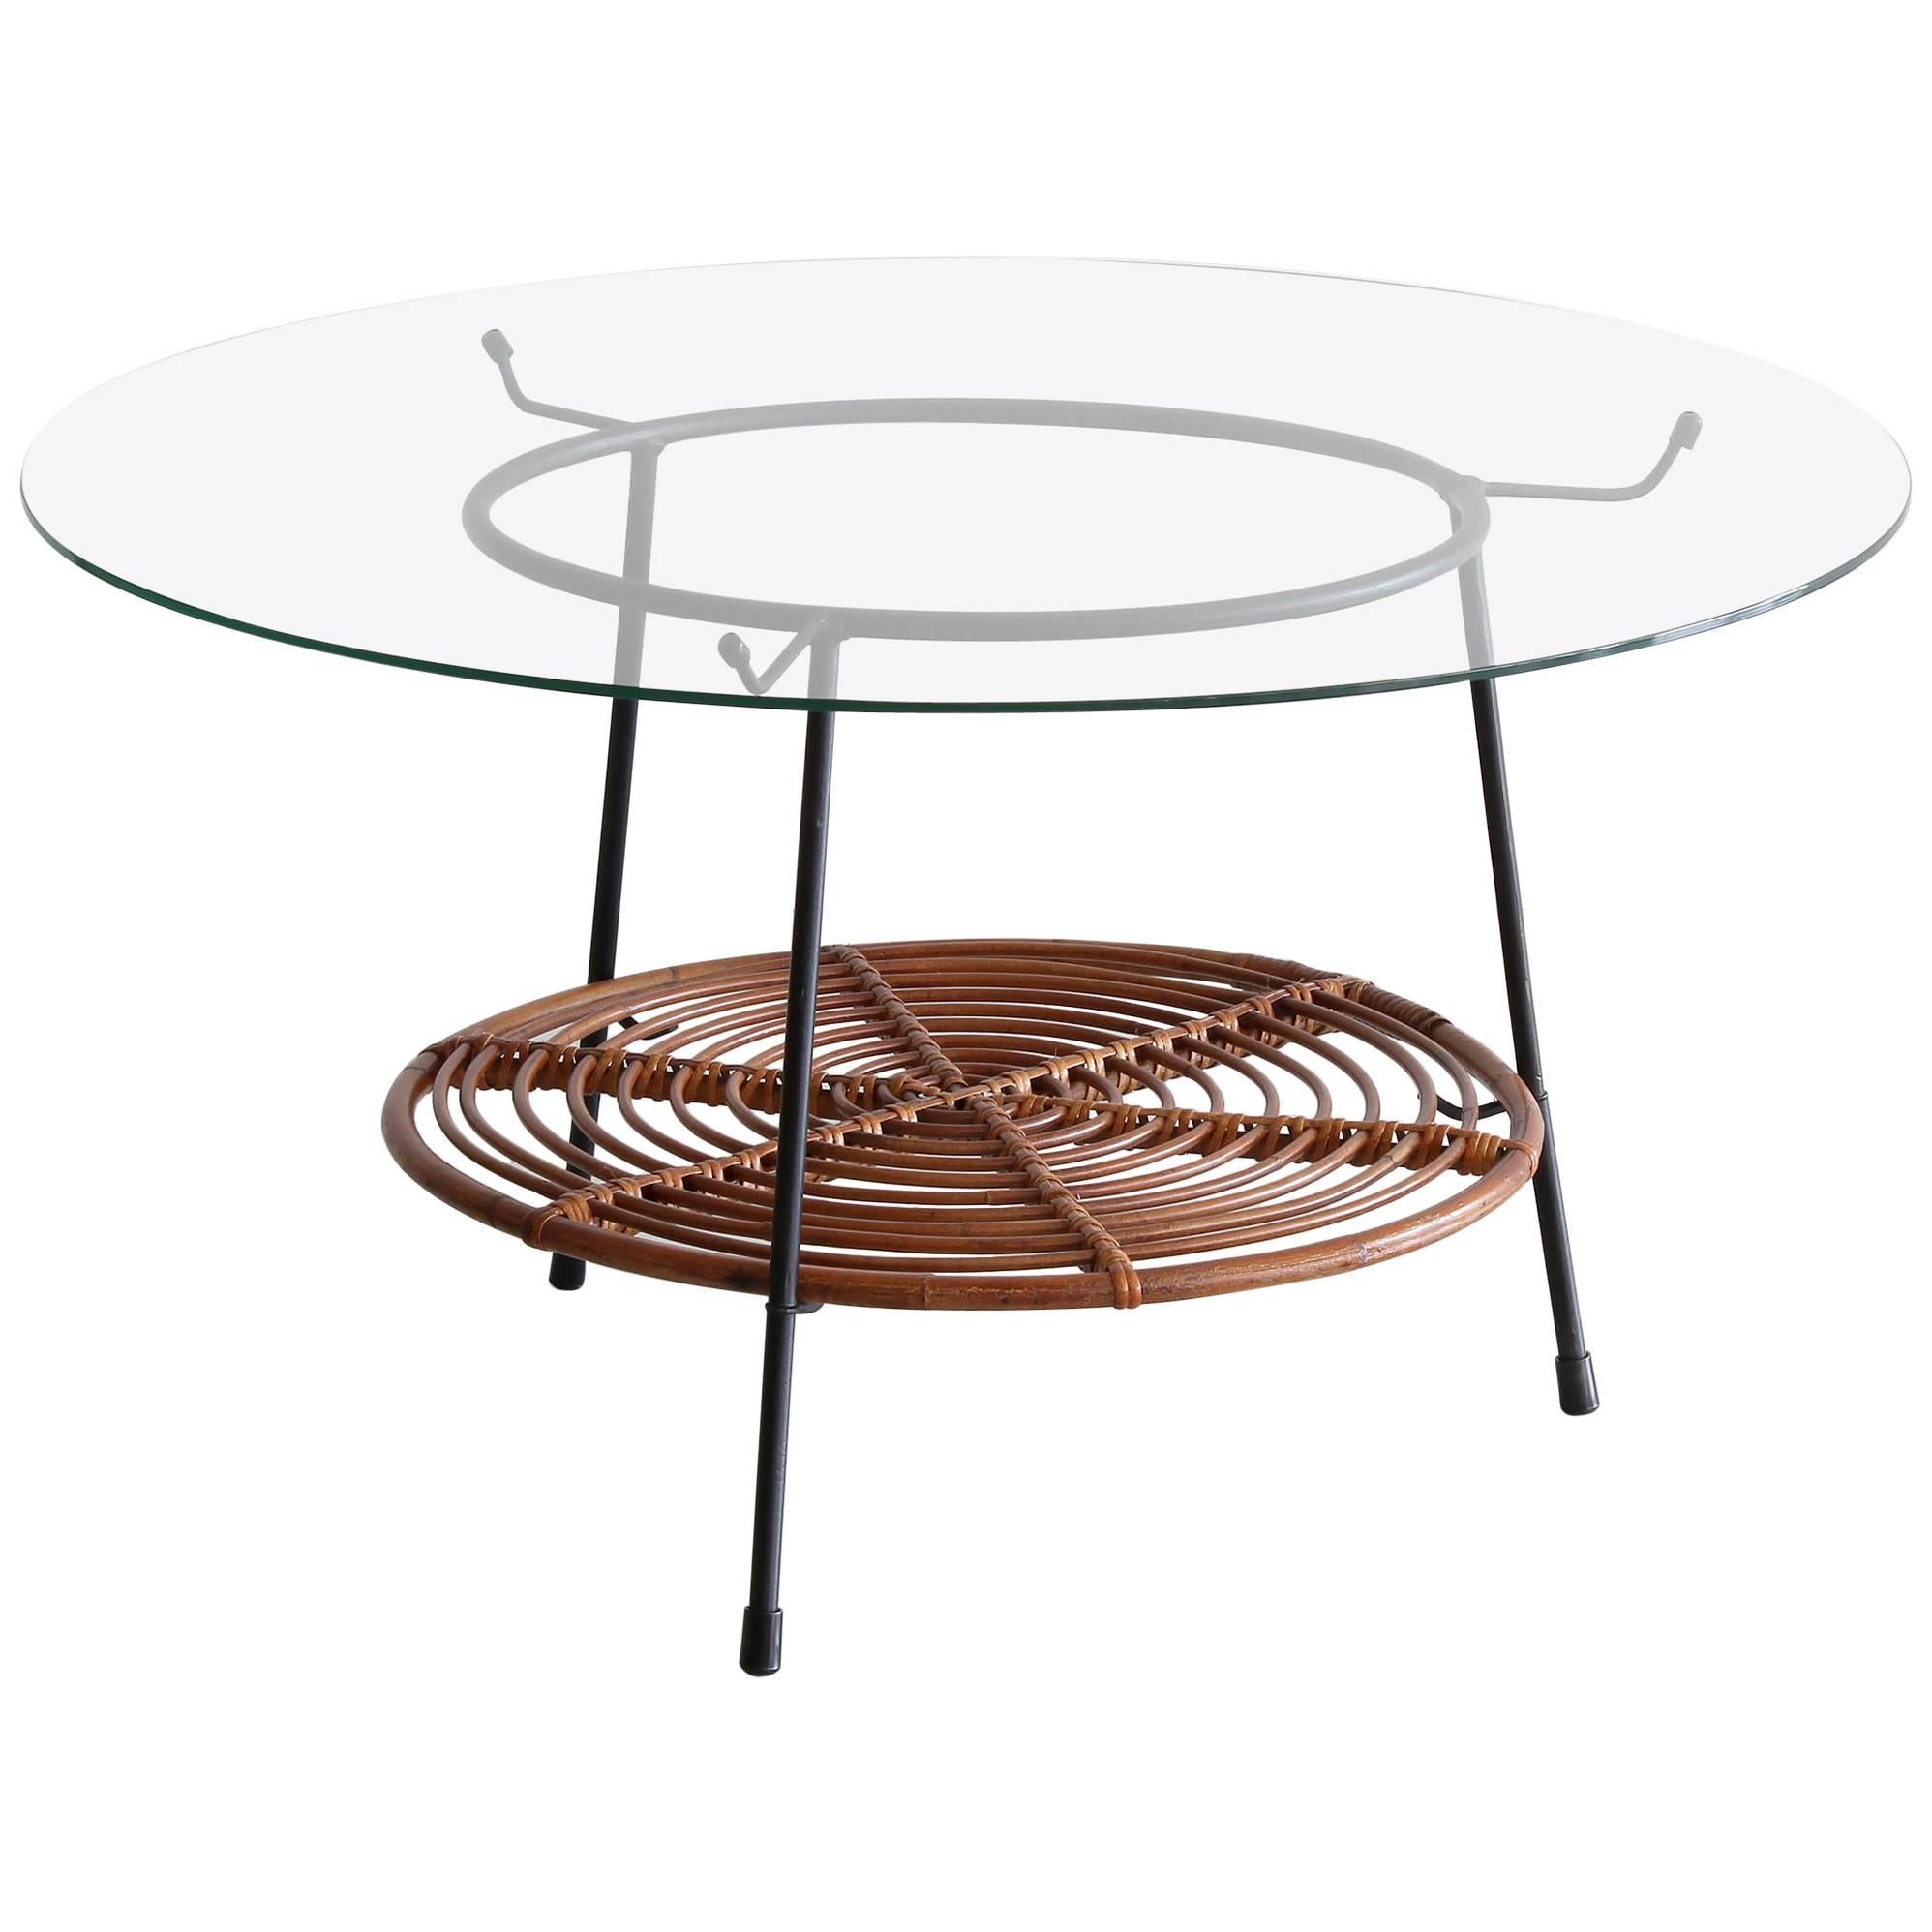 Italian Wicker and Iron Table with Glass Top by Raymor